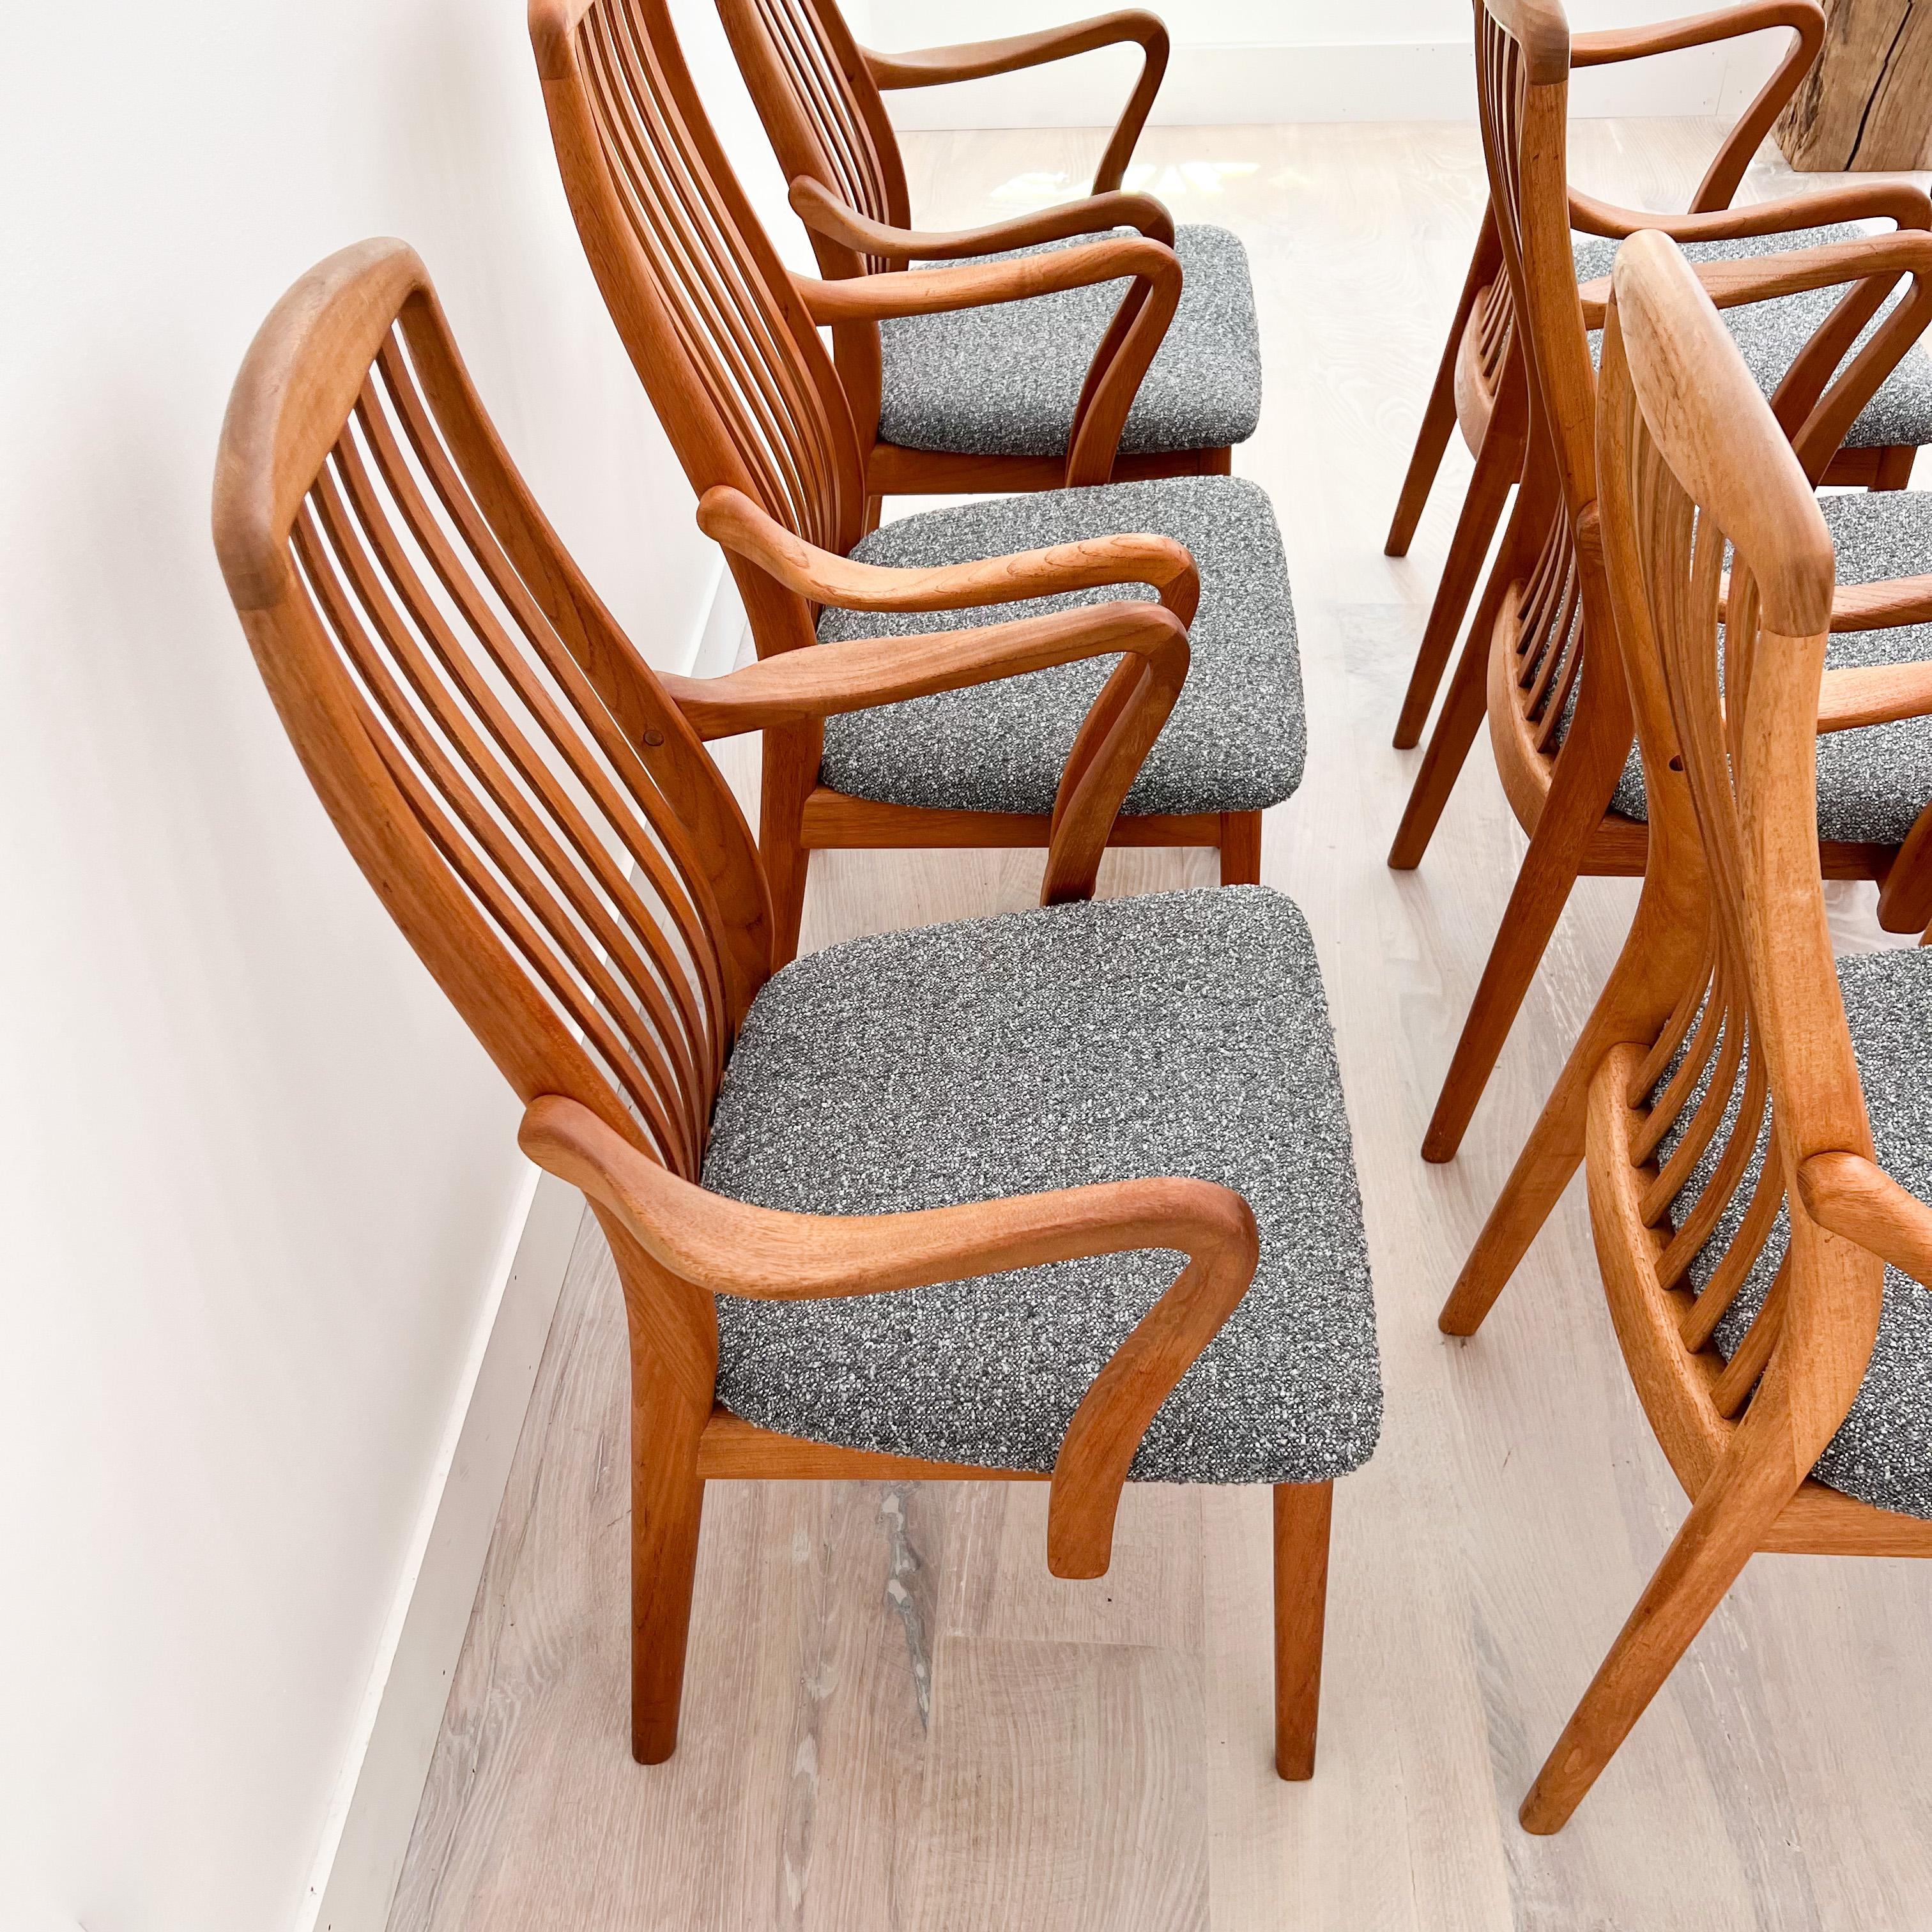 Late 20th Century Set of 8 Danish Teak Dining Chairs with New Upholstery by Virsidan A/S